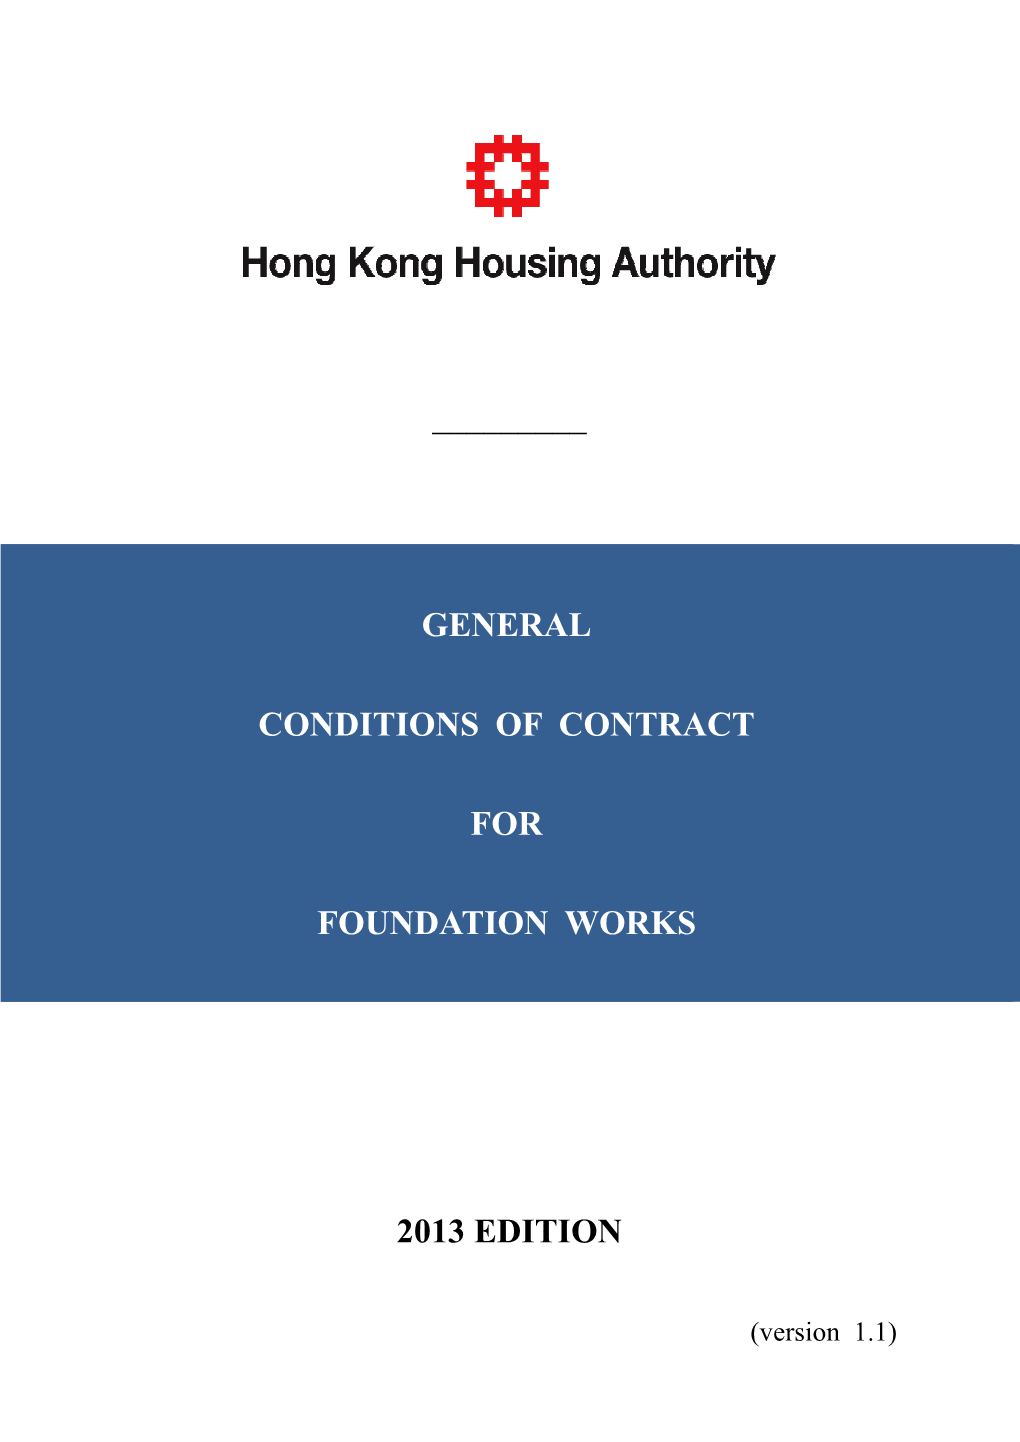 General Conditions of Contract for Foundation Works 2013 Edition (Version 1.1)